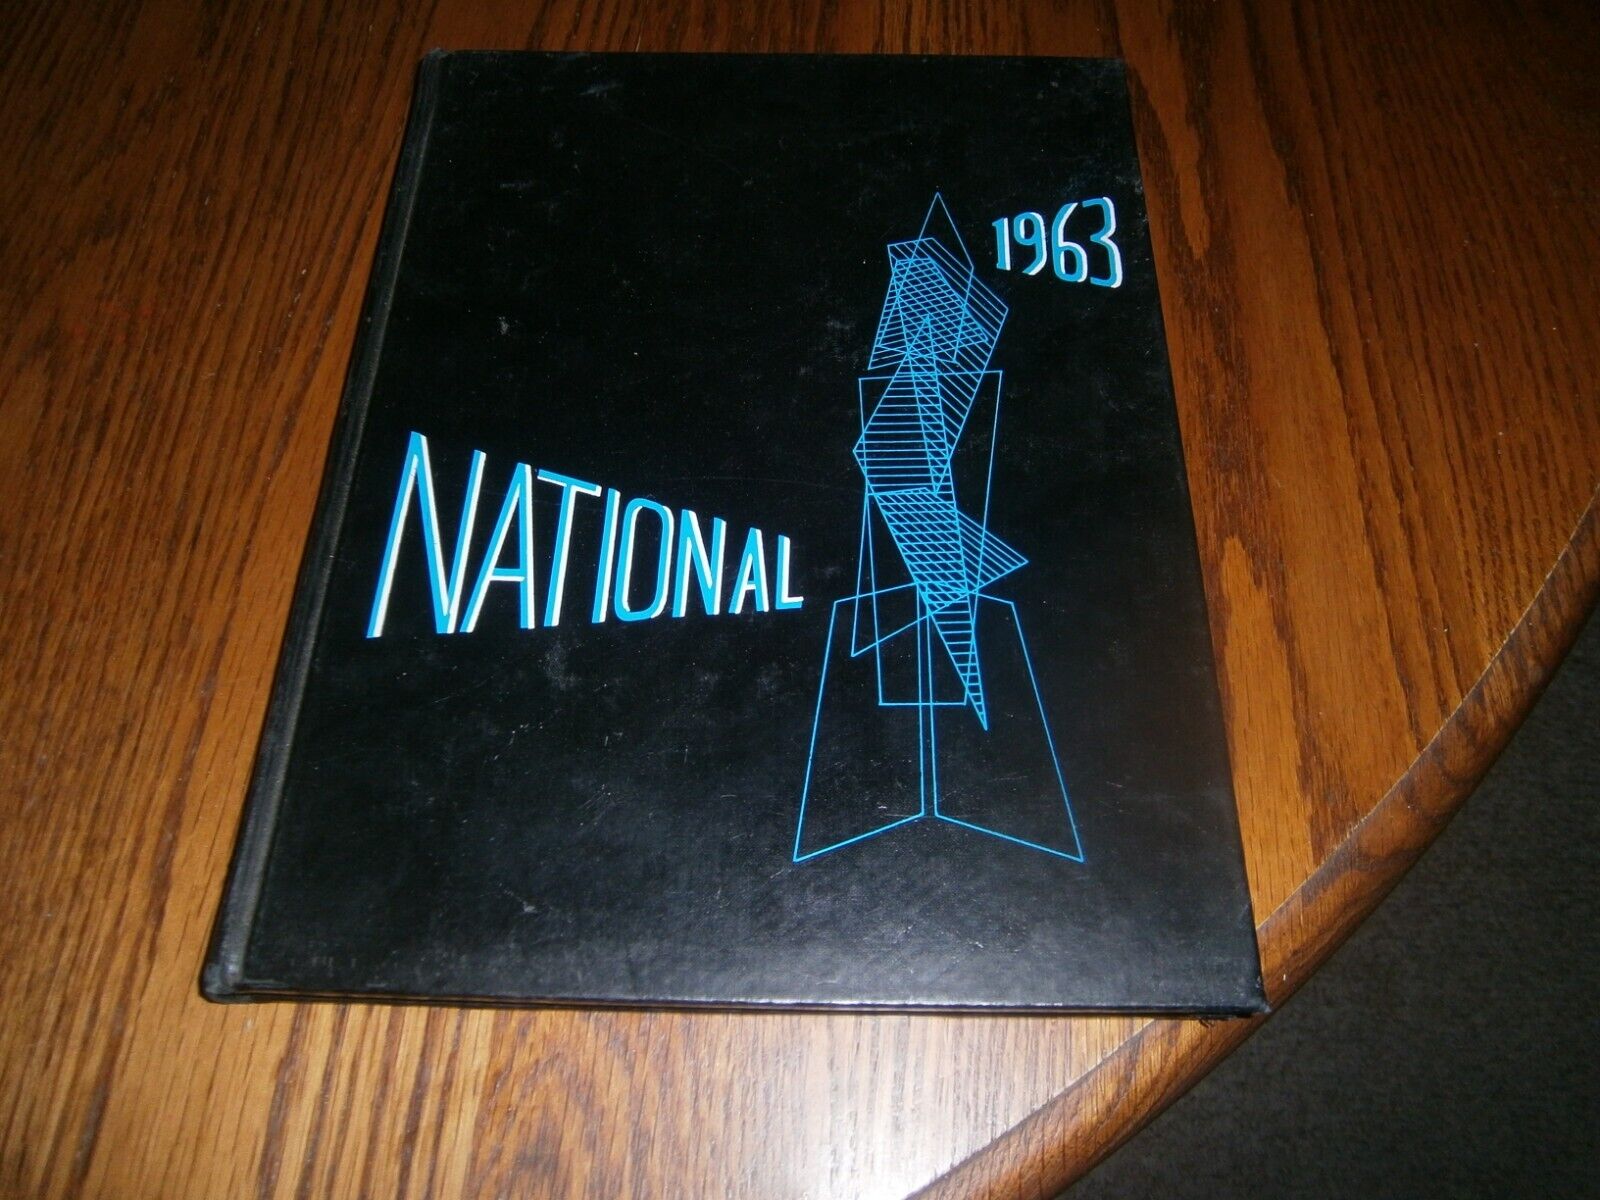 1963 NATIONAL COLLEGE OF EDUCATION EVANSTON ILLINOIS YEARBOOK YEAR BOOK